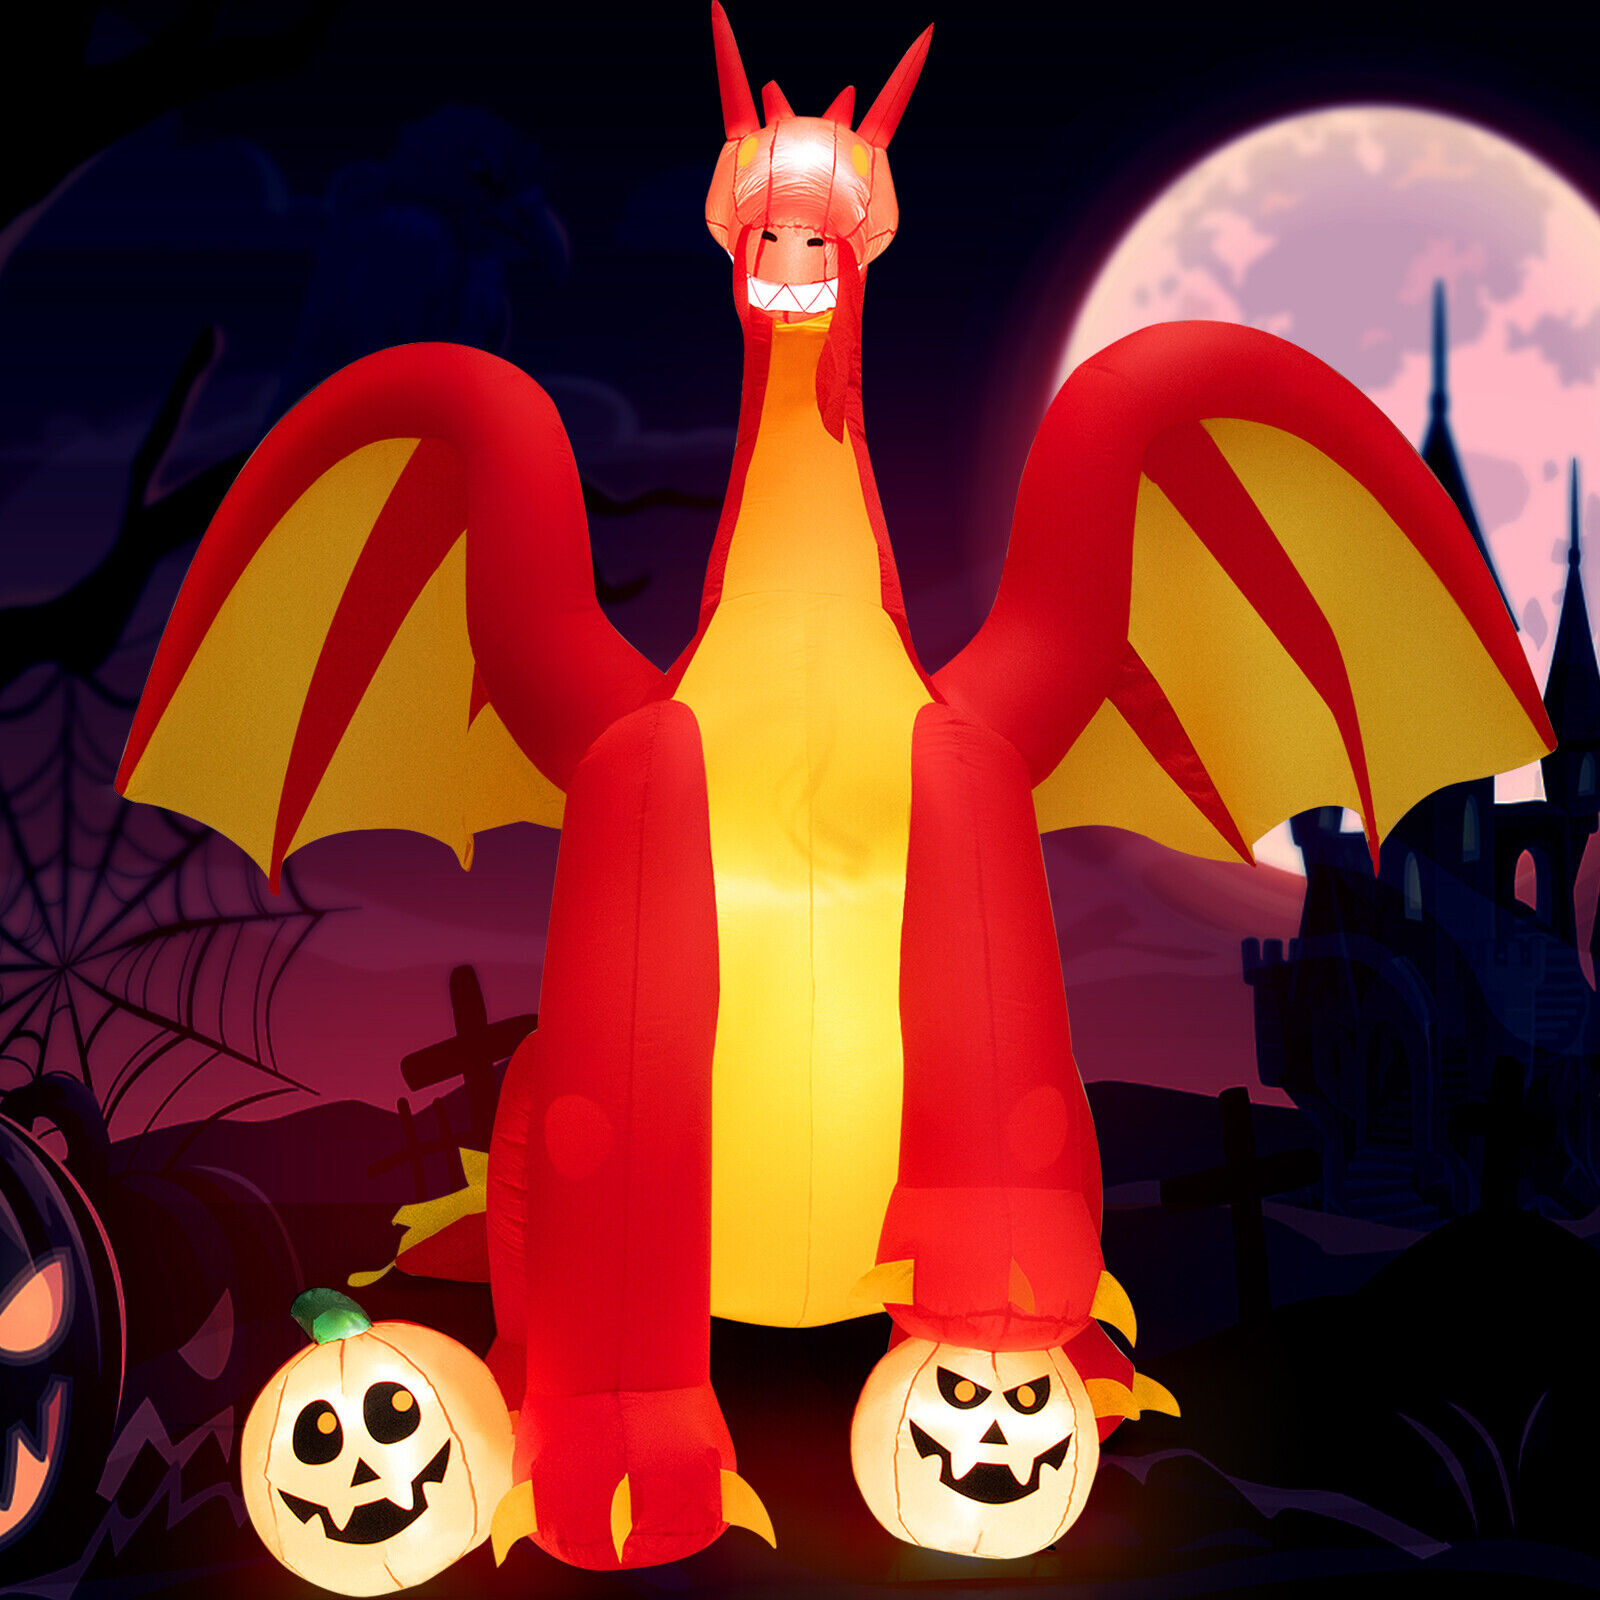 10 FT Inflatable Outdoor Halloween Decor Giant Animated Fire Dragon w/Lights